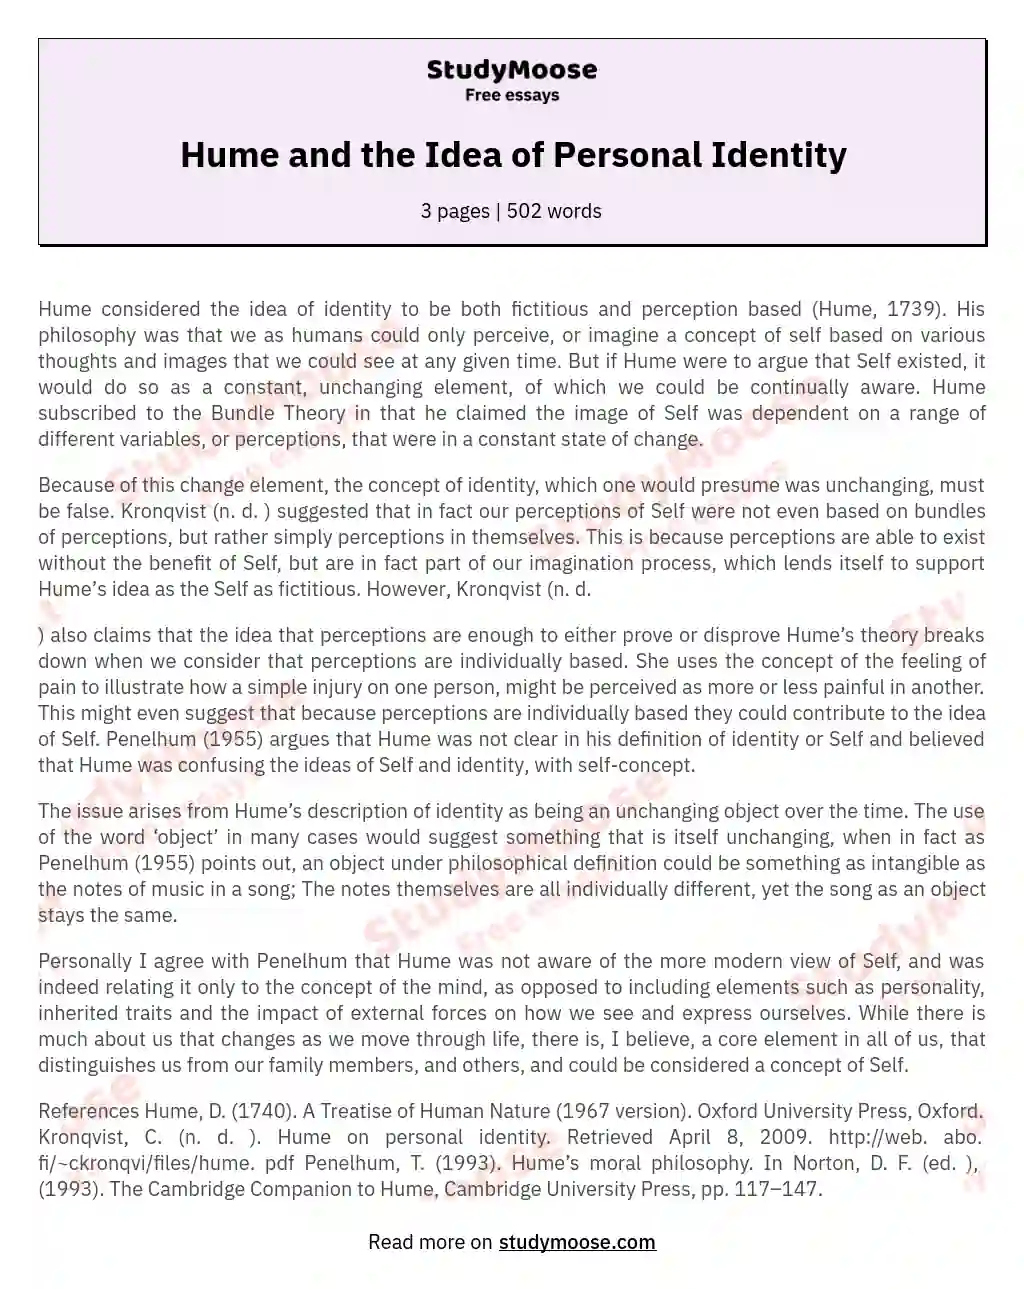 Hume and the Idea of Personal Identity